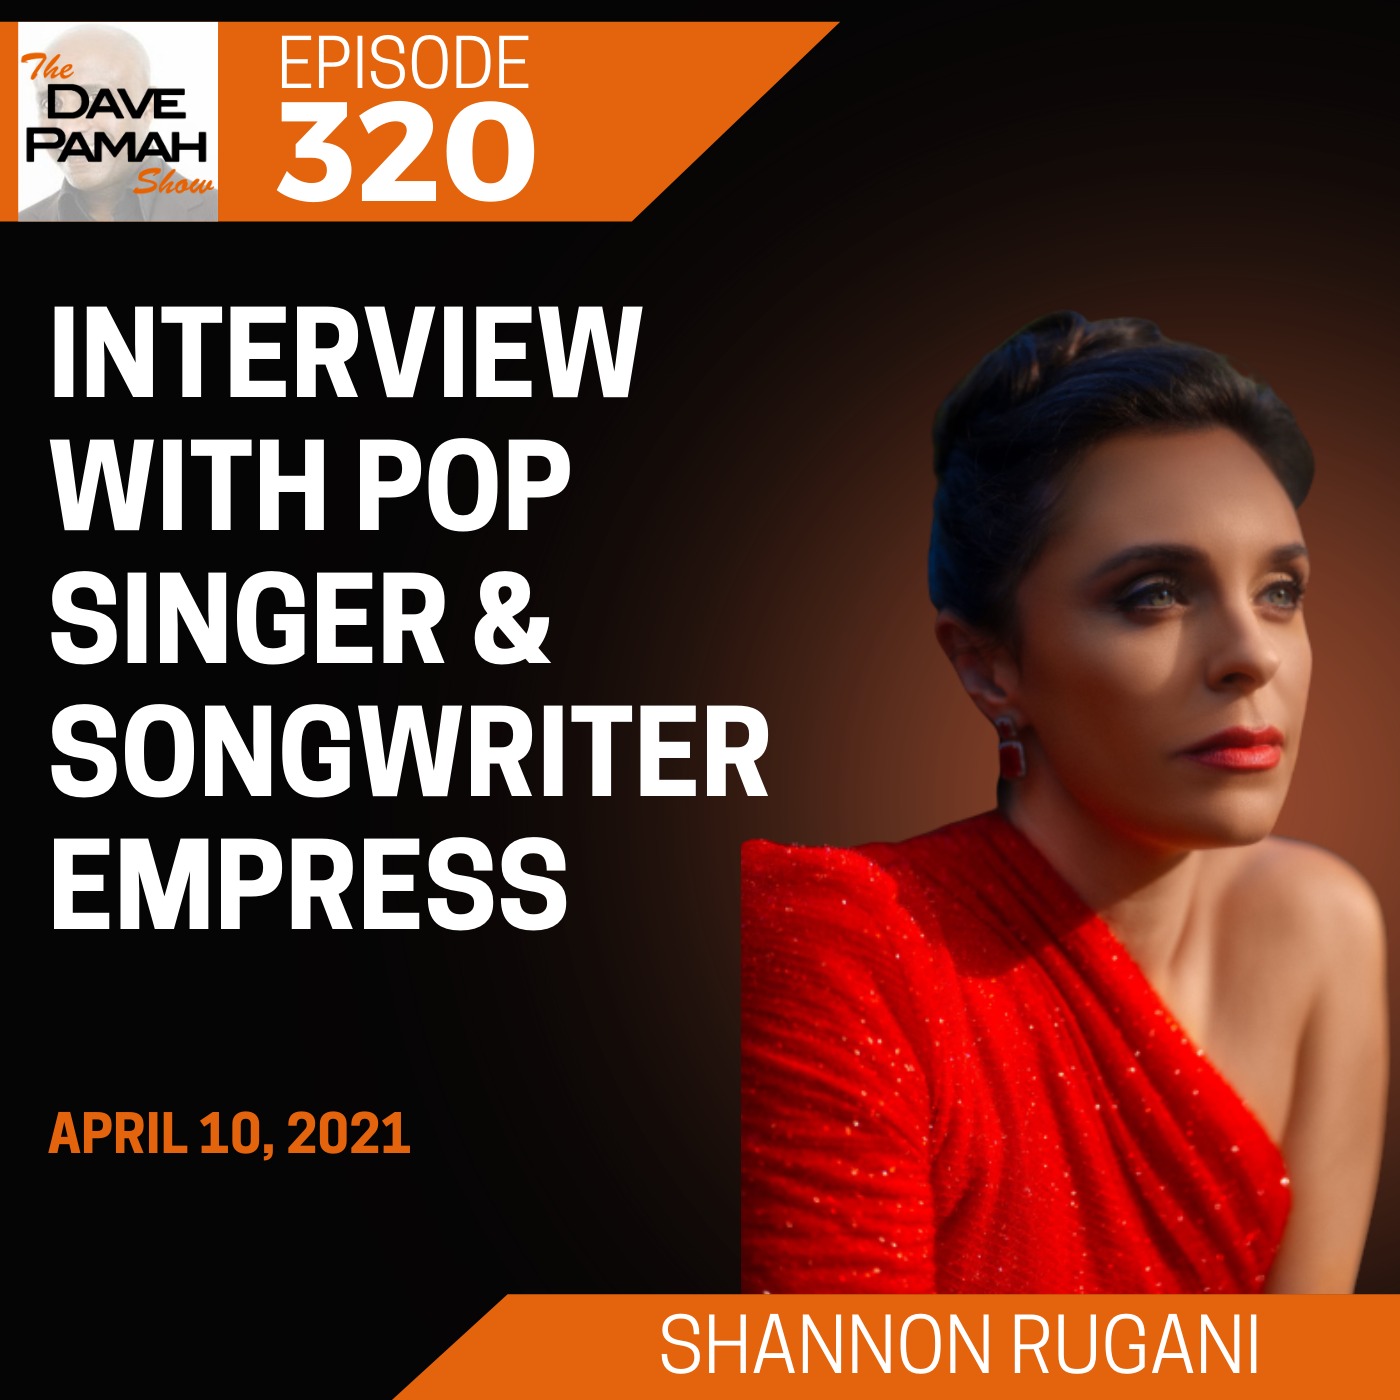 Interview with pop singer/songwriter Shannon Rugani aka EMPRESS Image